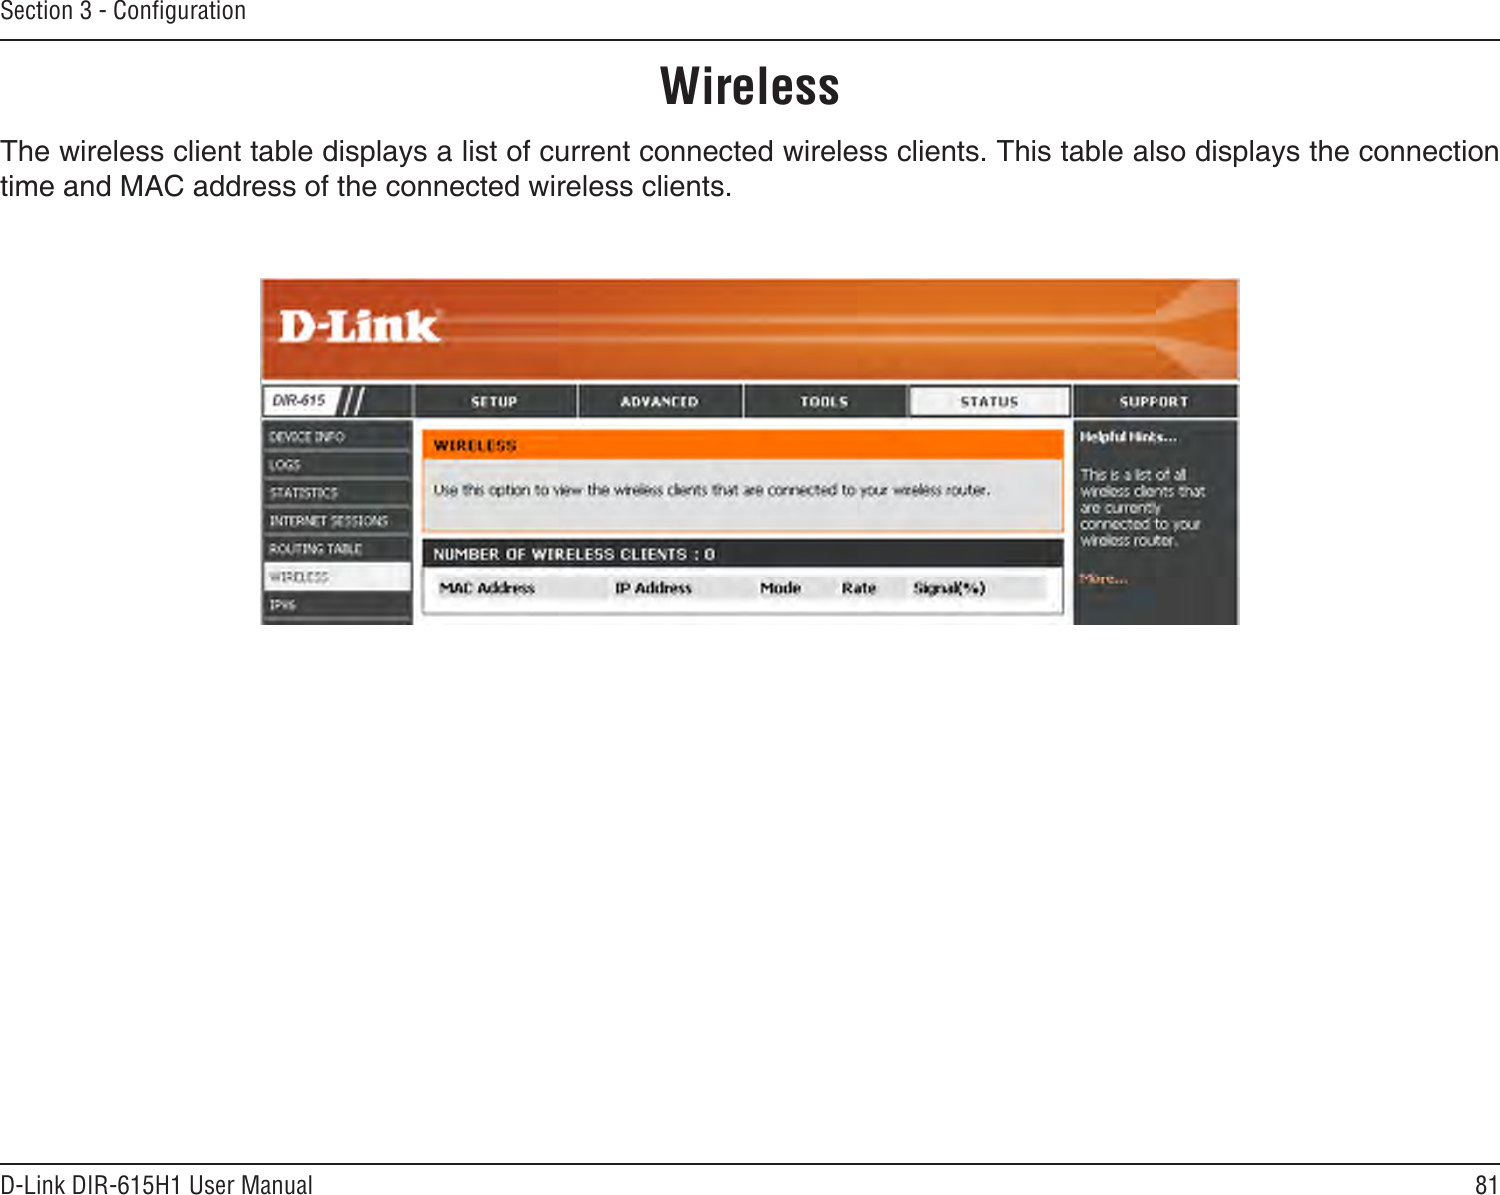 81D-Link DIR-615H1 User ManualSection 3 - CongurationThe wireless client table displays a list of current connected wireless clients. This table also displays the connection time and MAC address of the connected wireless clients.Wireless